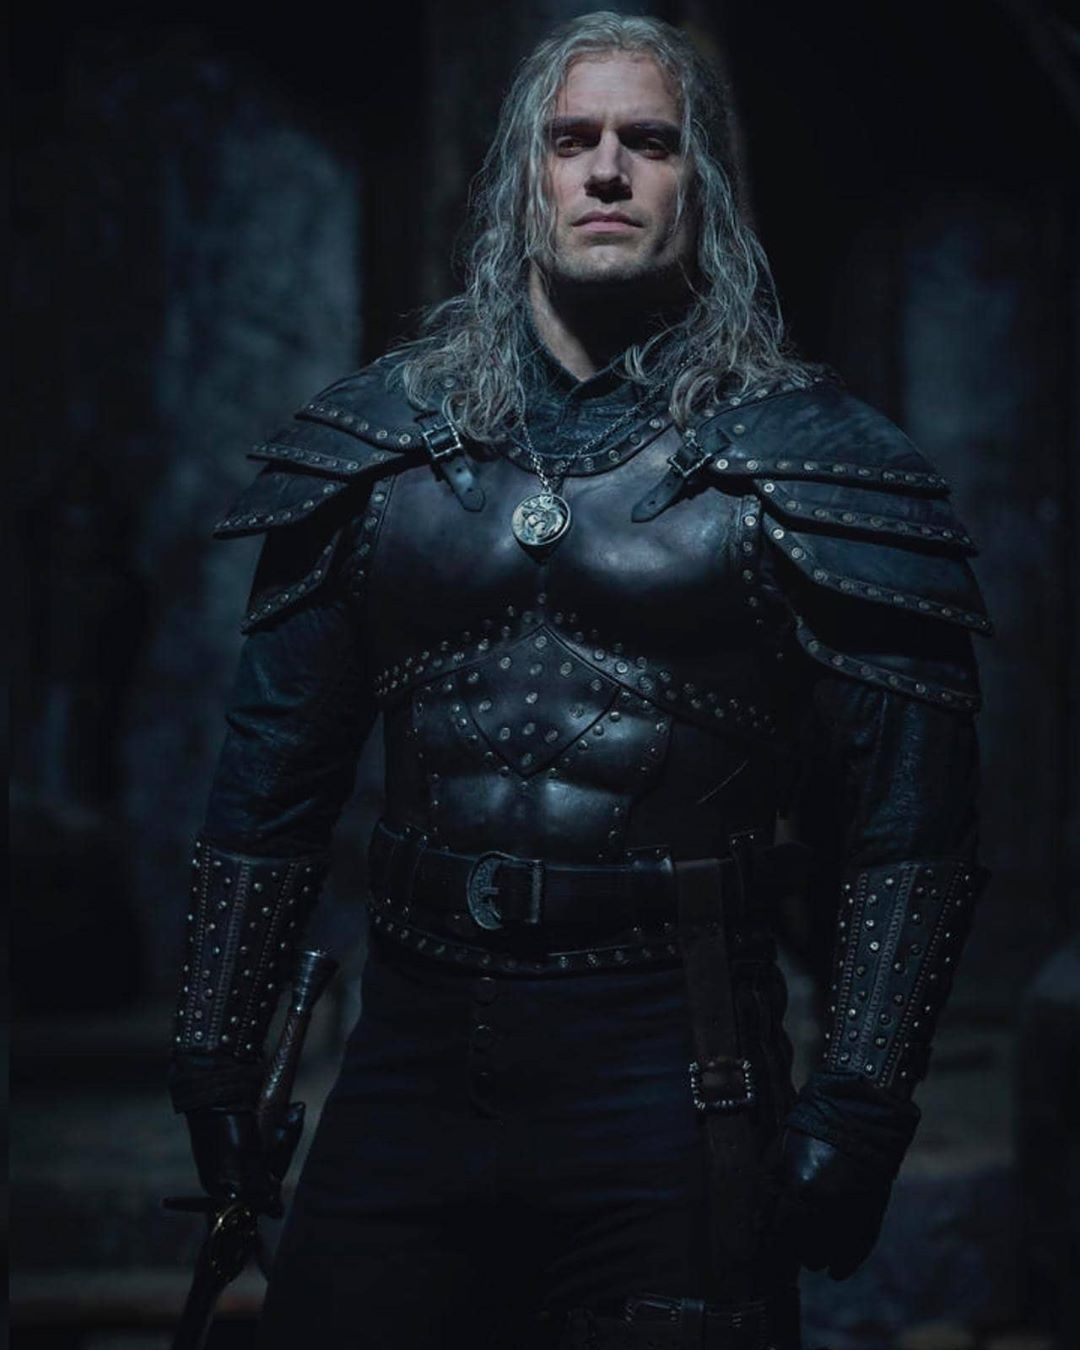 LOOK: Henry Cavill returns as Geralt of Rivia in first photos from ‘The Witcher’ season 2